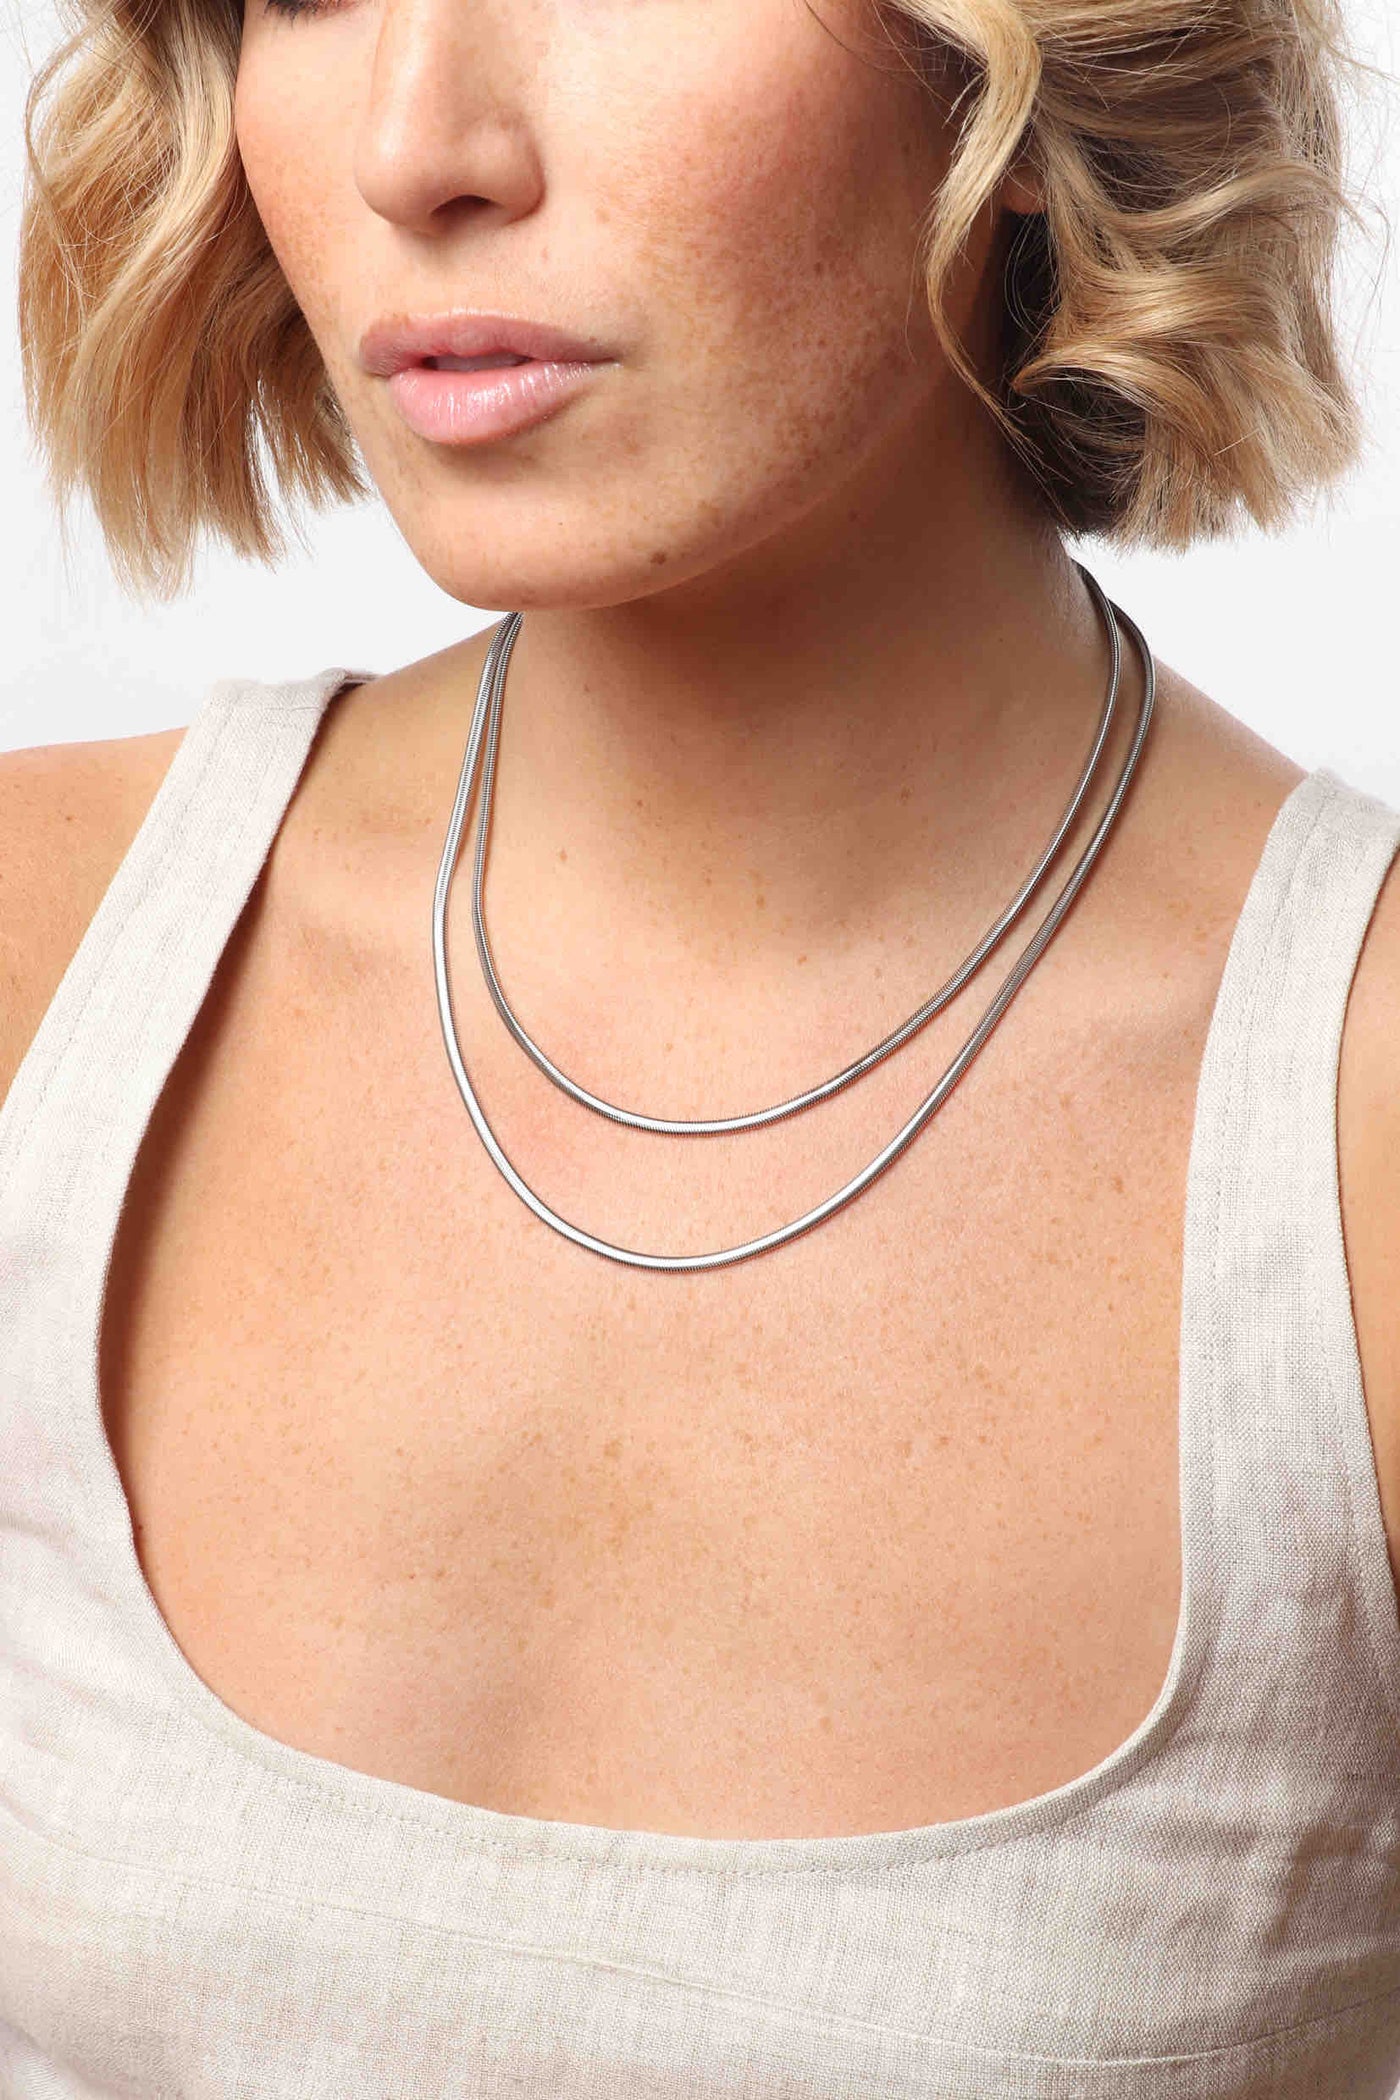 Marrin Costello wearing Marrin Costello Jewelry Ramsey Layers snake herringbone chain layered together 2 in 1 necklace with lobster clasp closure and extender. Waterproof, sustainable, hypoallergenic. Polished stainless steel.